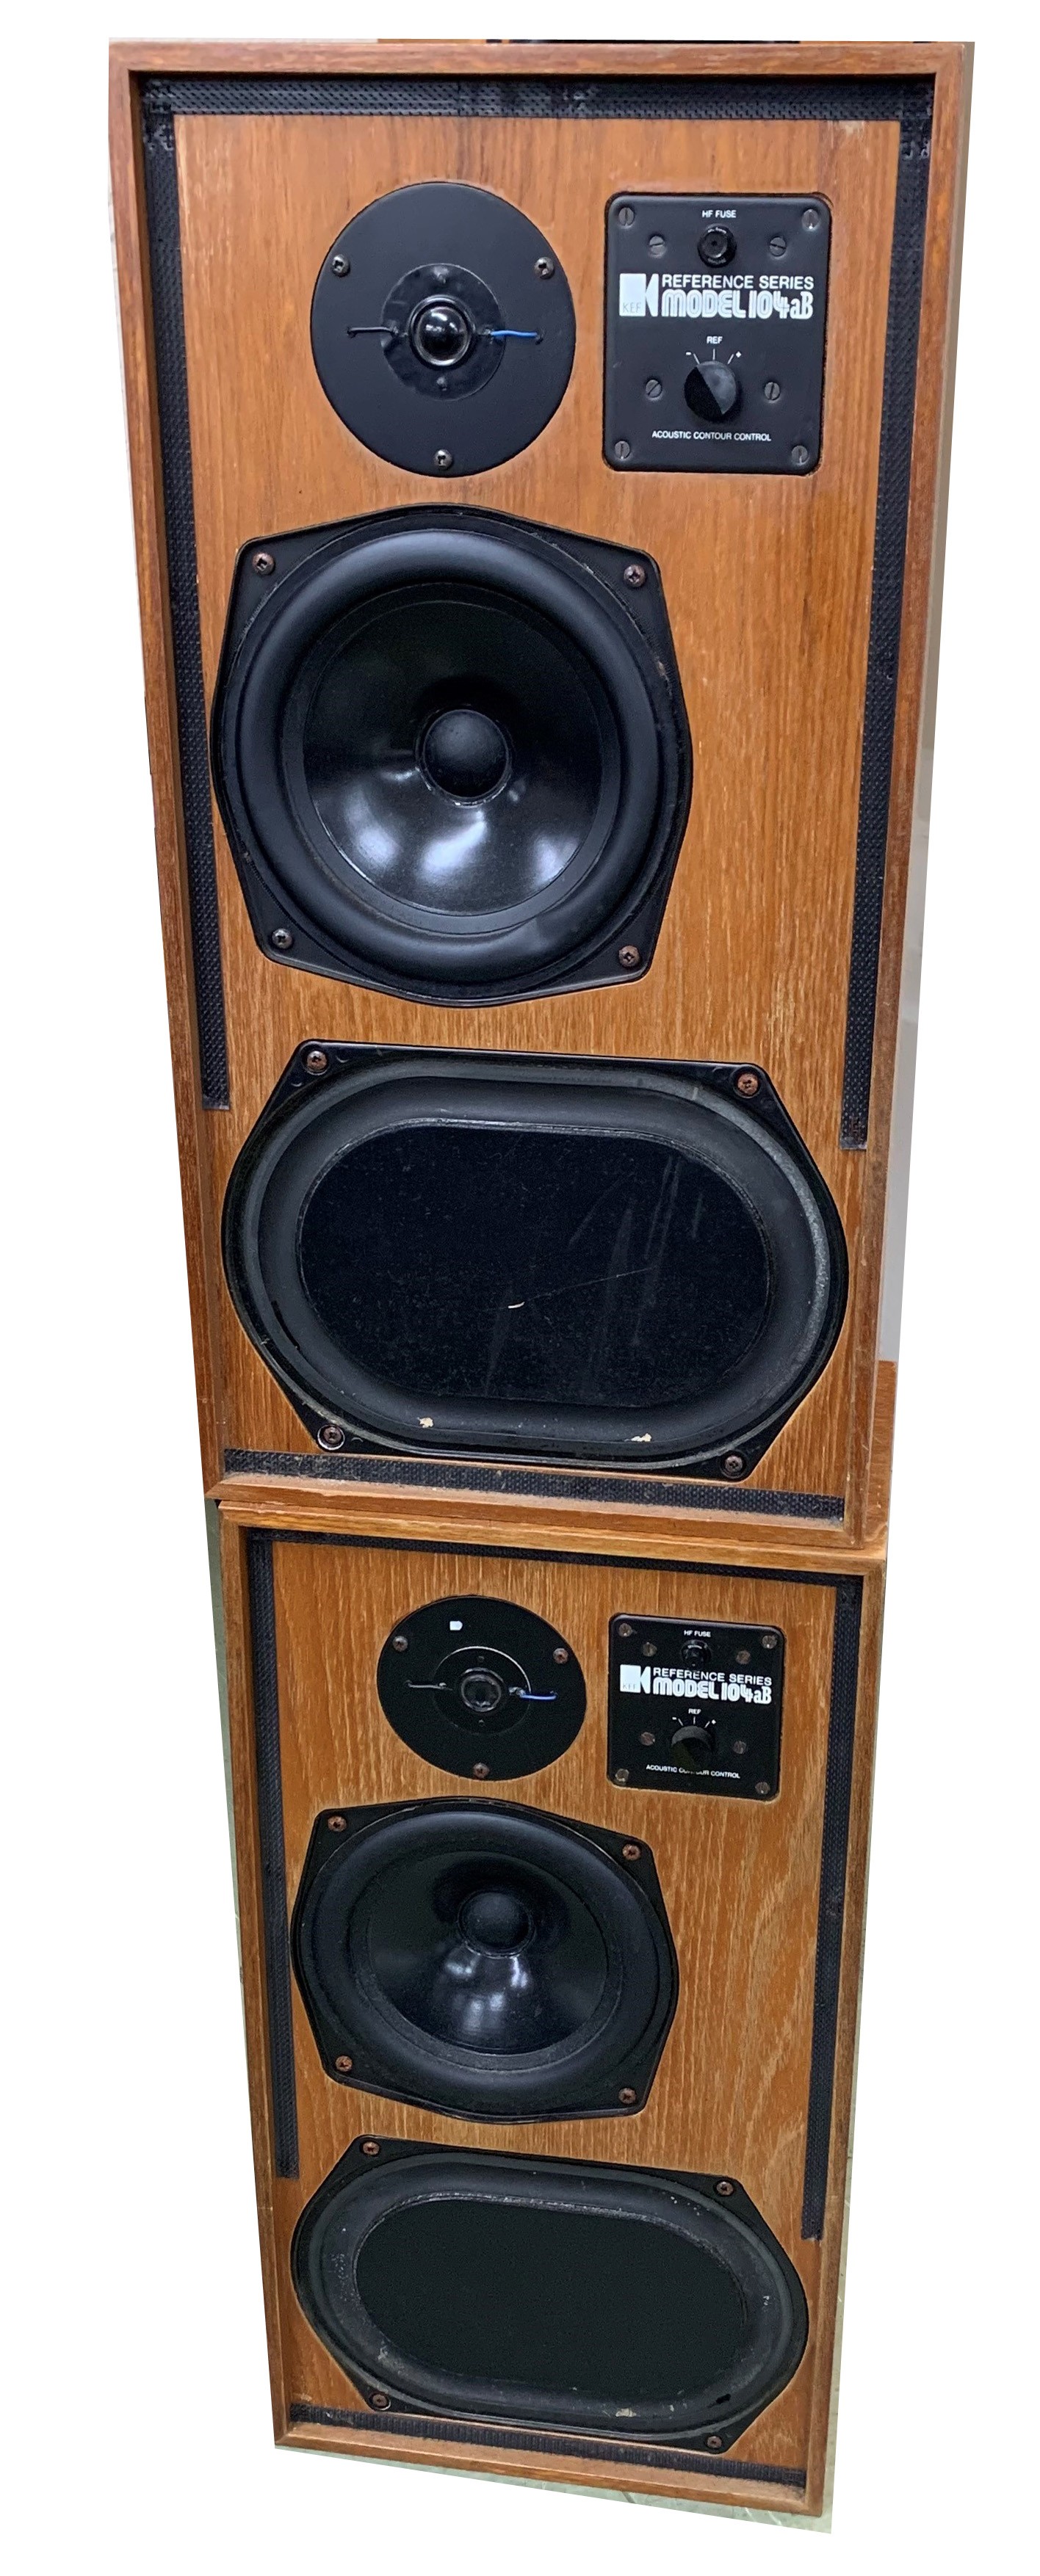 Pair of KEF Model 104Ab reference monitor speakers